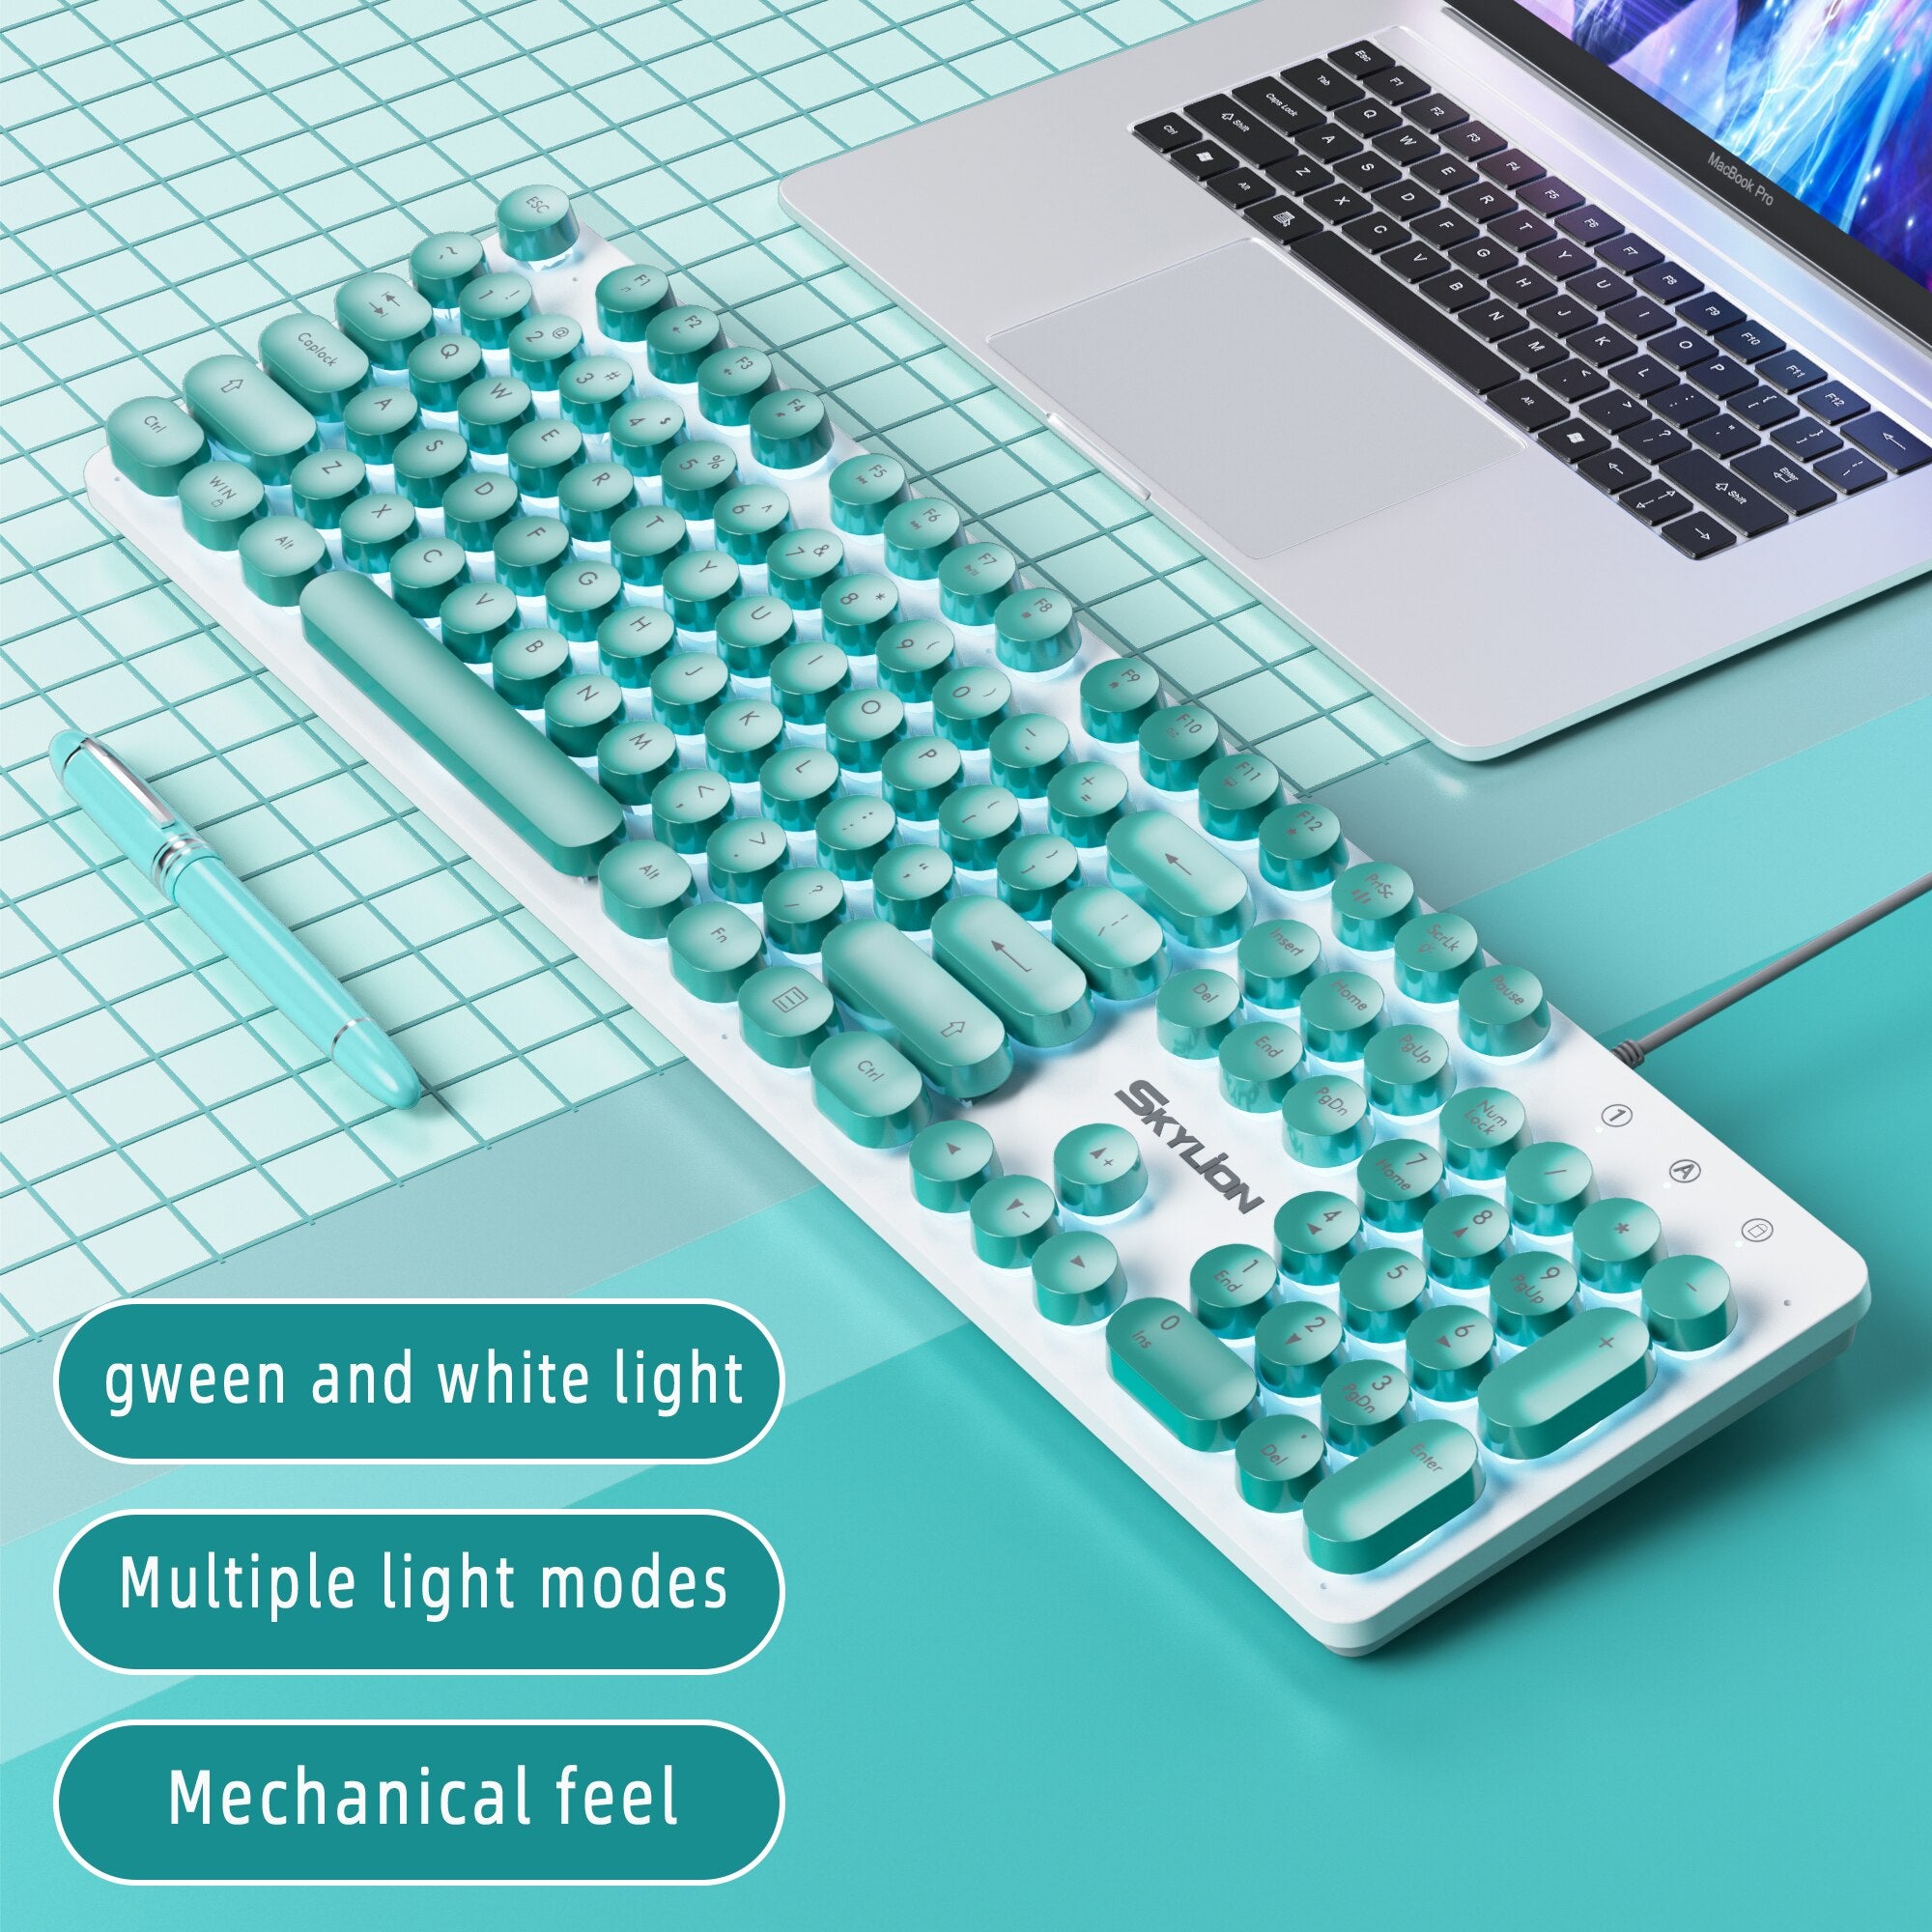 SKYLION H300 Wired 104 Keys Membrane Keyboard Many Kinds of Colorful Lighting Gaming and Office For Windows and IOS System